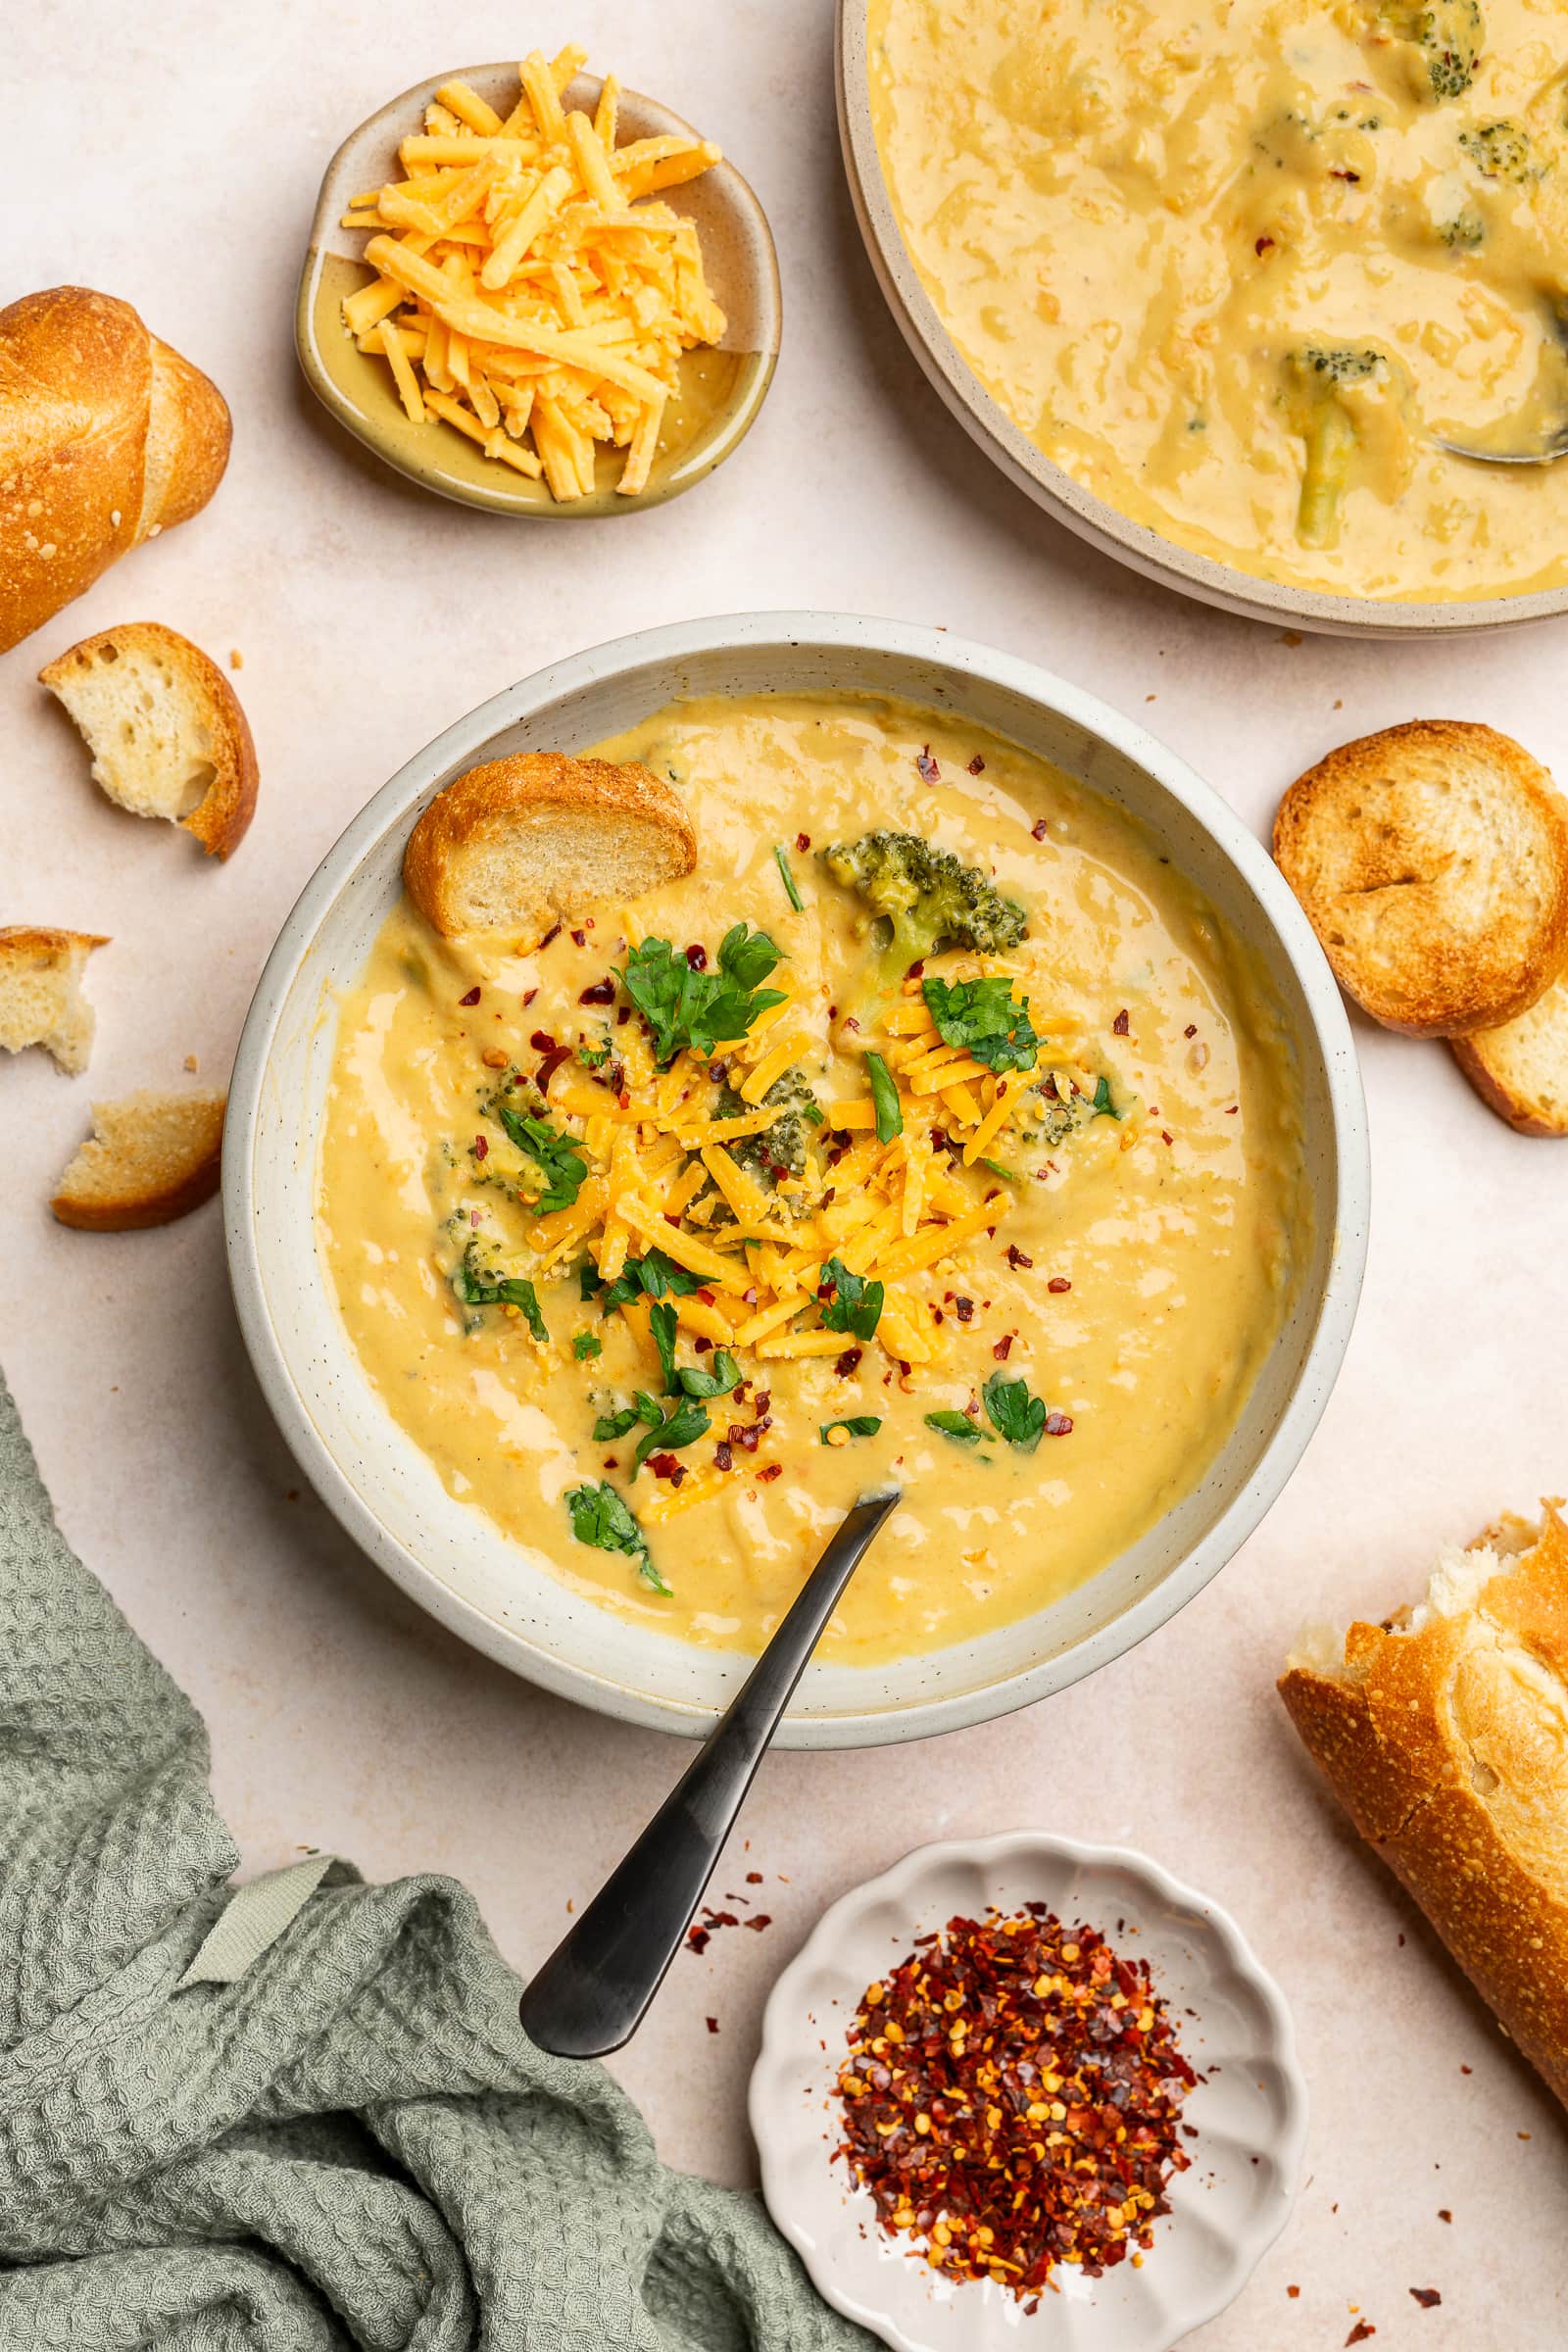 Broccoli cheese soup garnished with cheese, parsley, and red chili flakes with bread on the side.